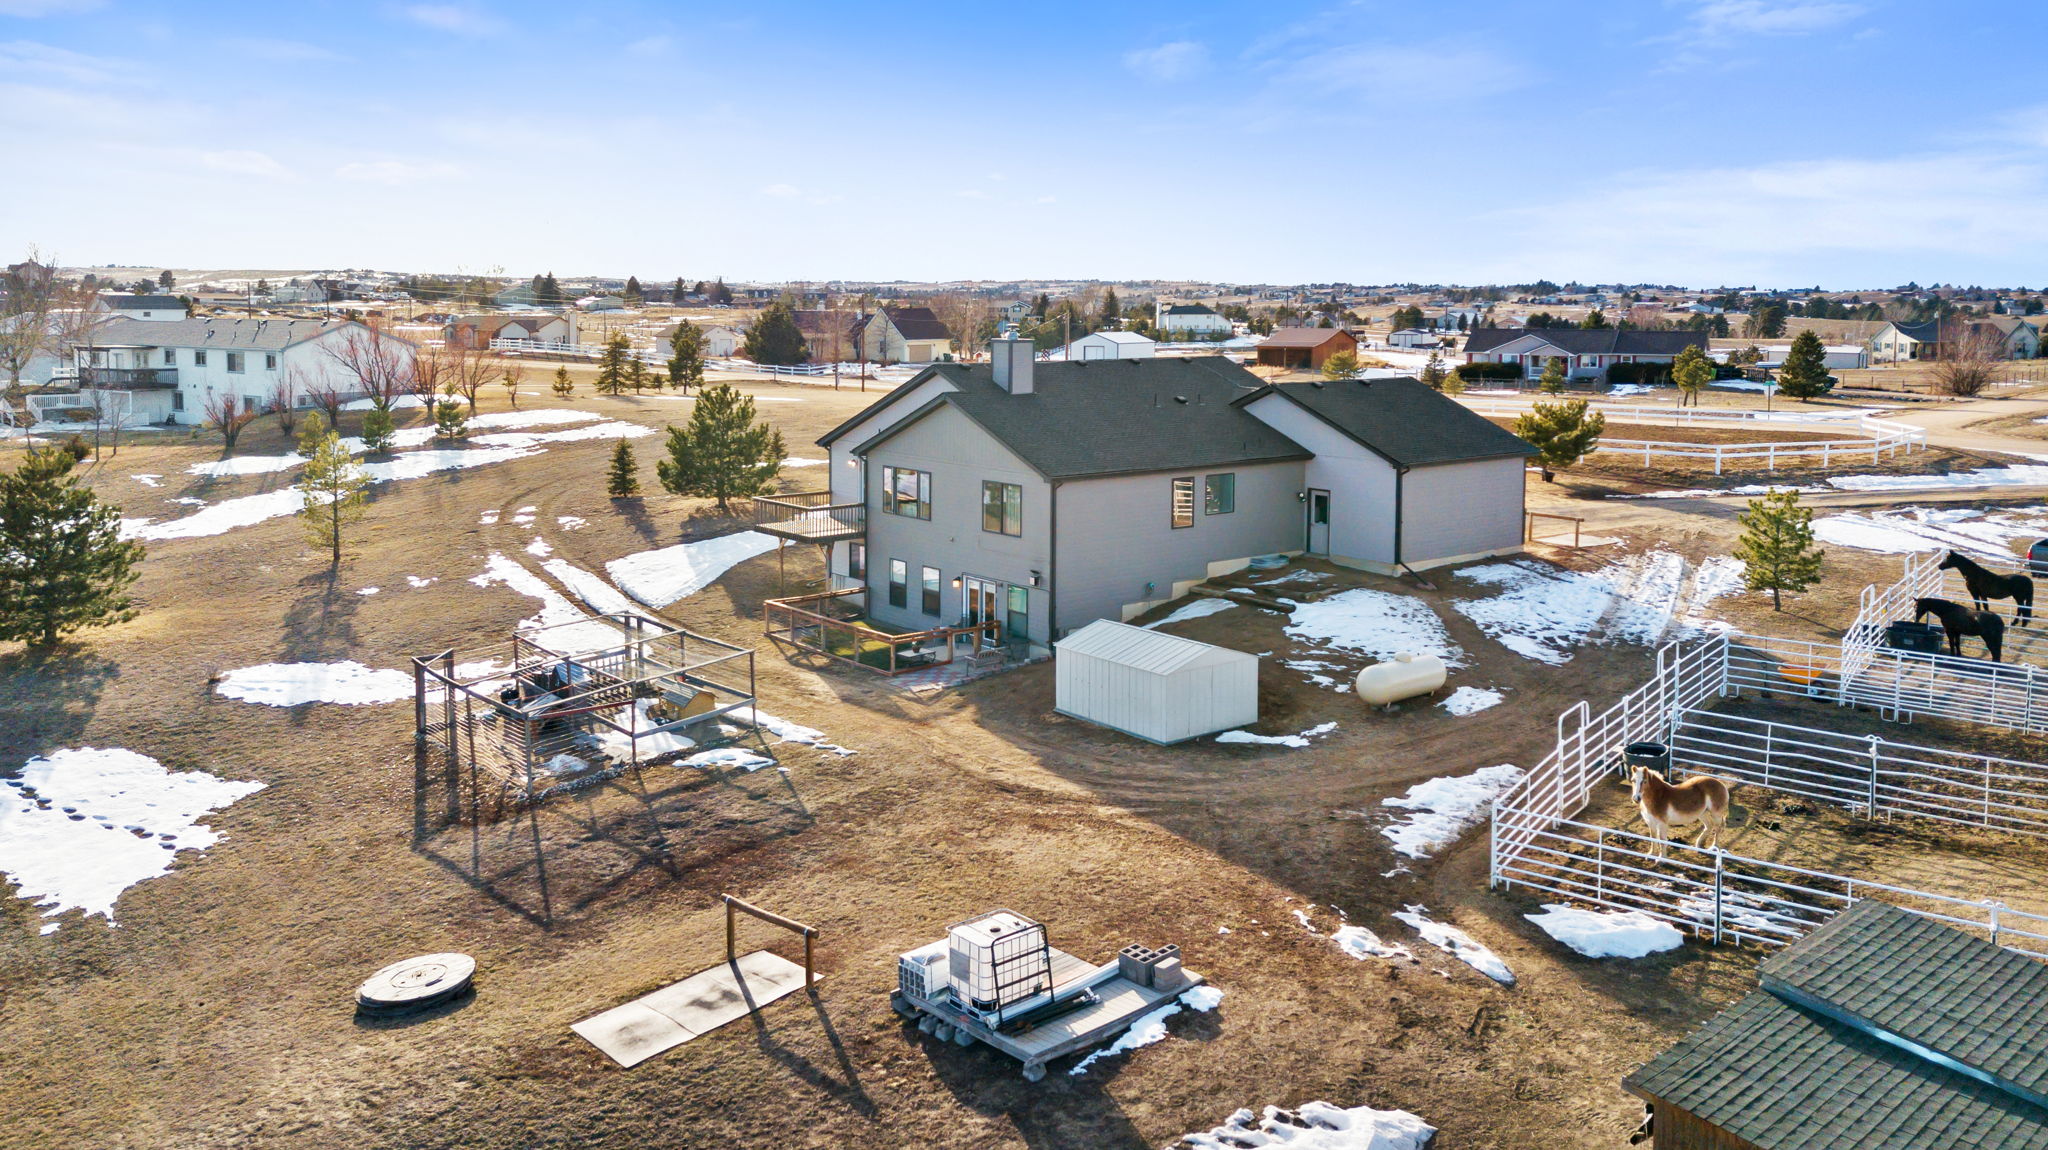  42386 Thunder Hill Rd, Parker, CO 80138, US Photo 41